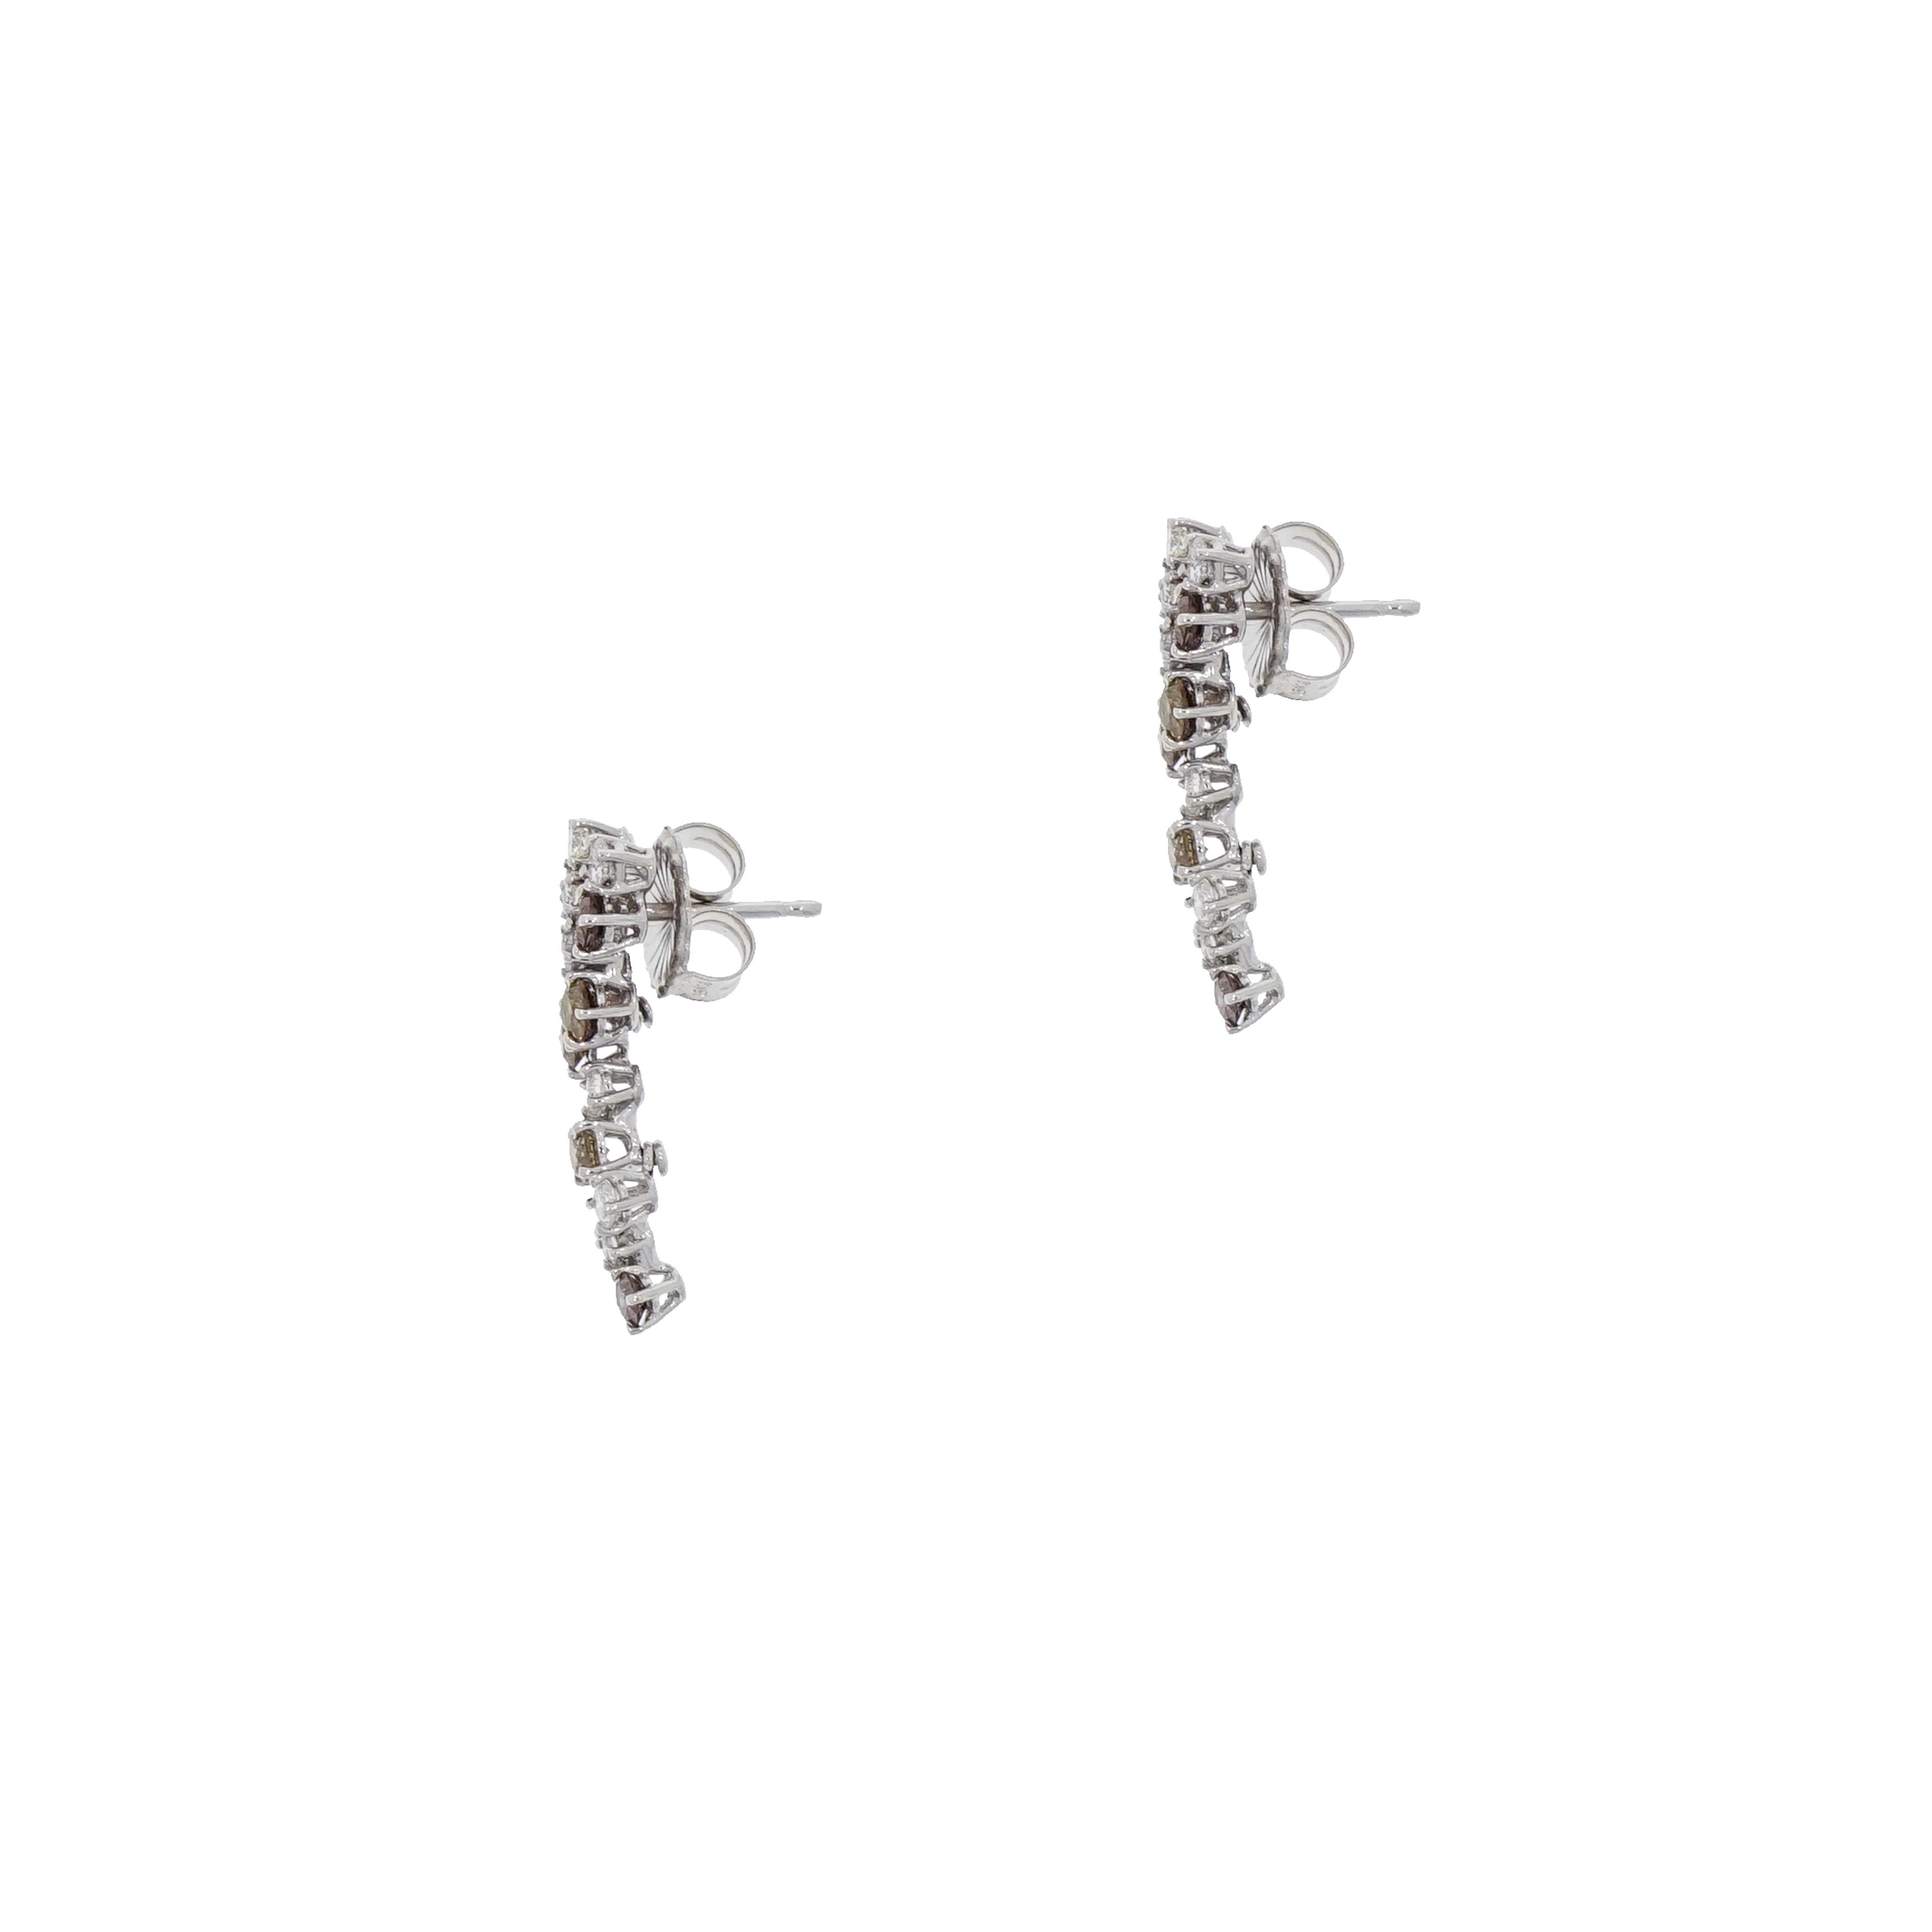 We love creating Diamond earrings, especially for everyday as well as the most precious life moments to remember and cherish.
Handcrafted with the finest quality Diamonds in 14k white gold and showcase 1.00 carats total weight of round white and